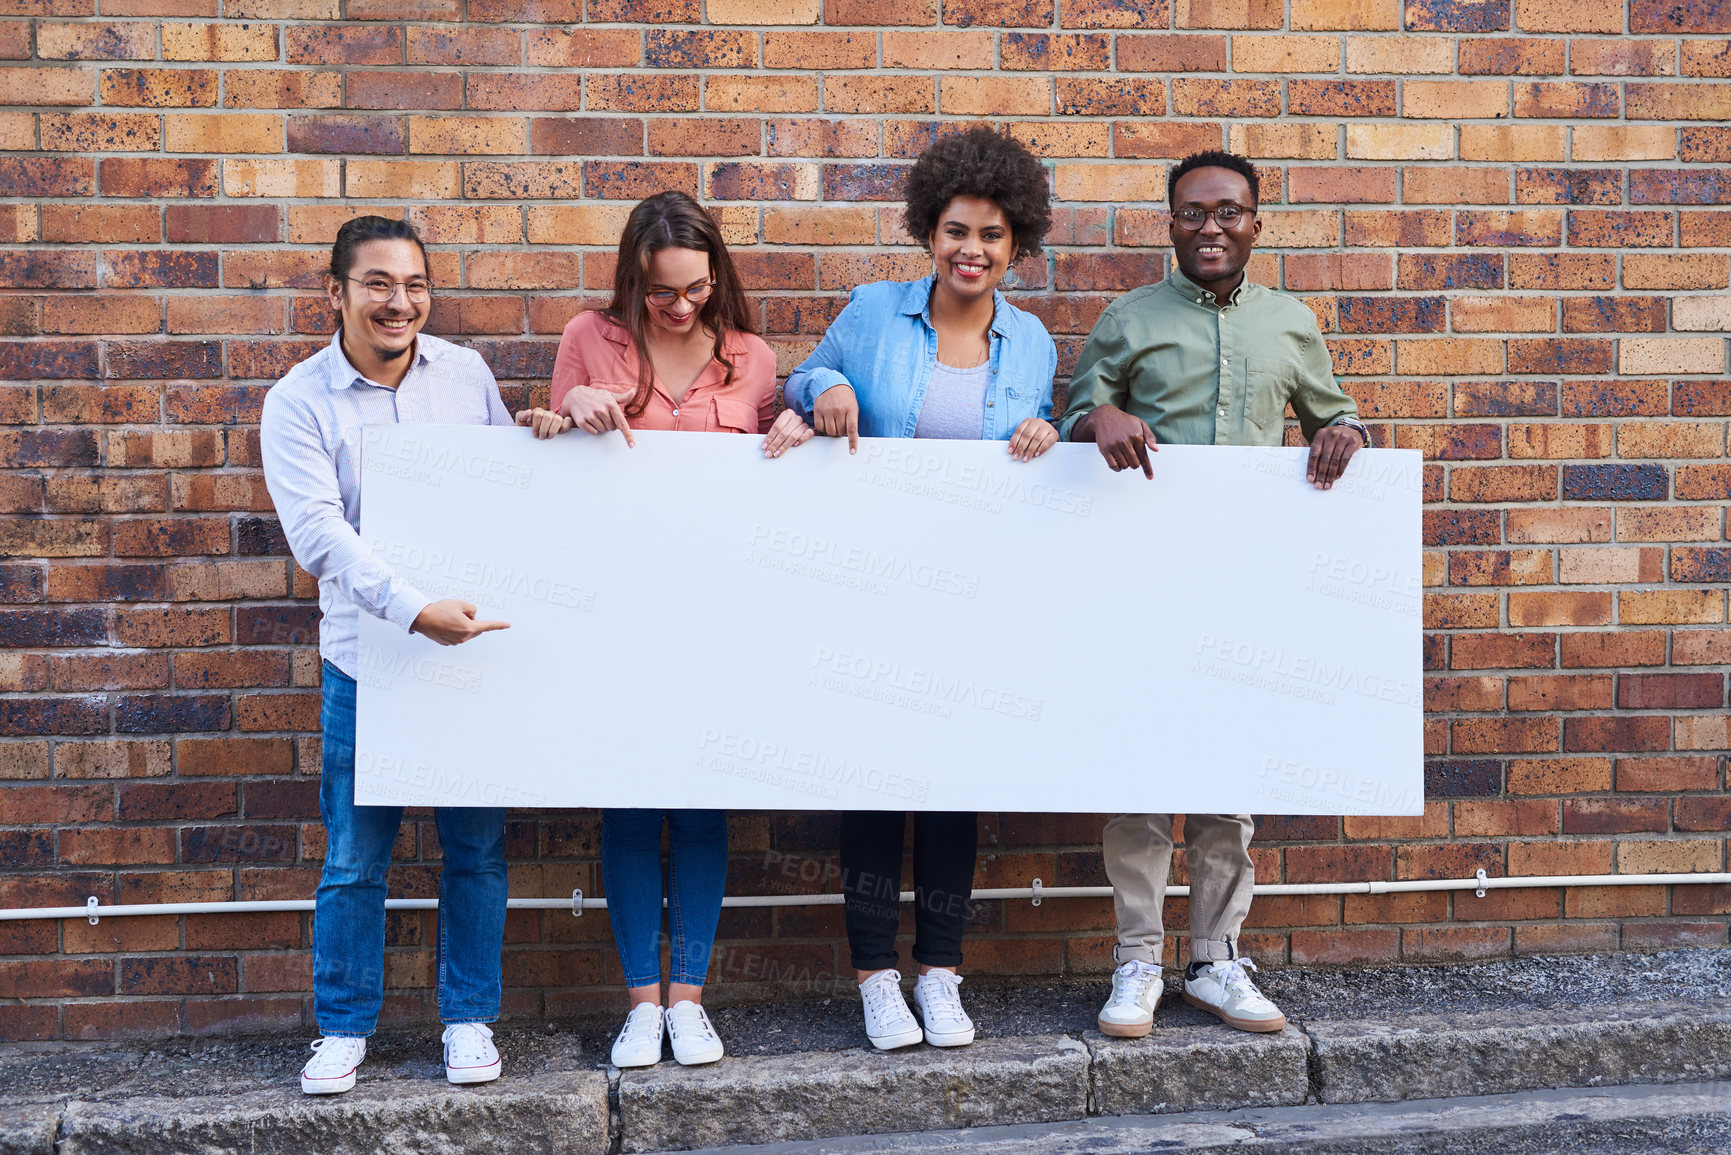 Buy stock photo Shot of a group of young people holding a blank banner against an urban background outdoors